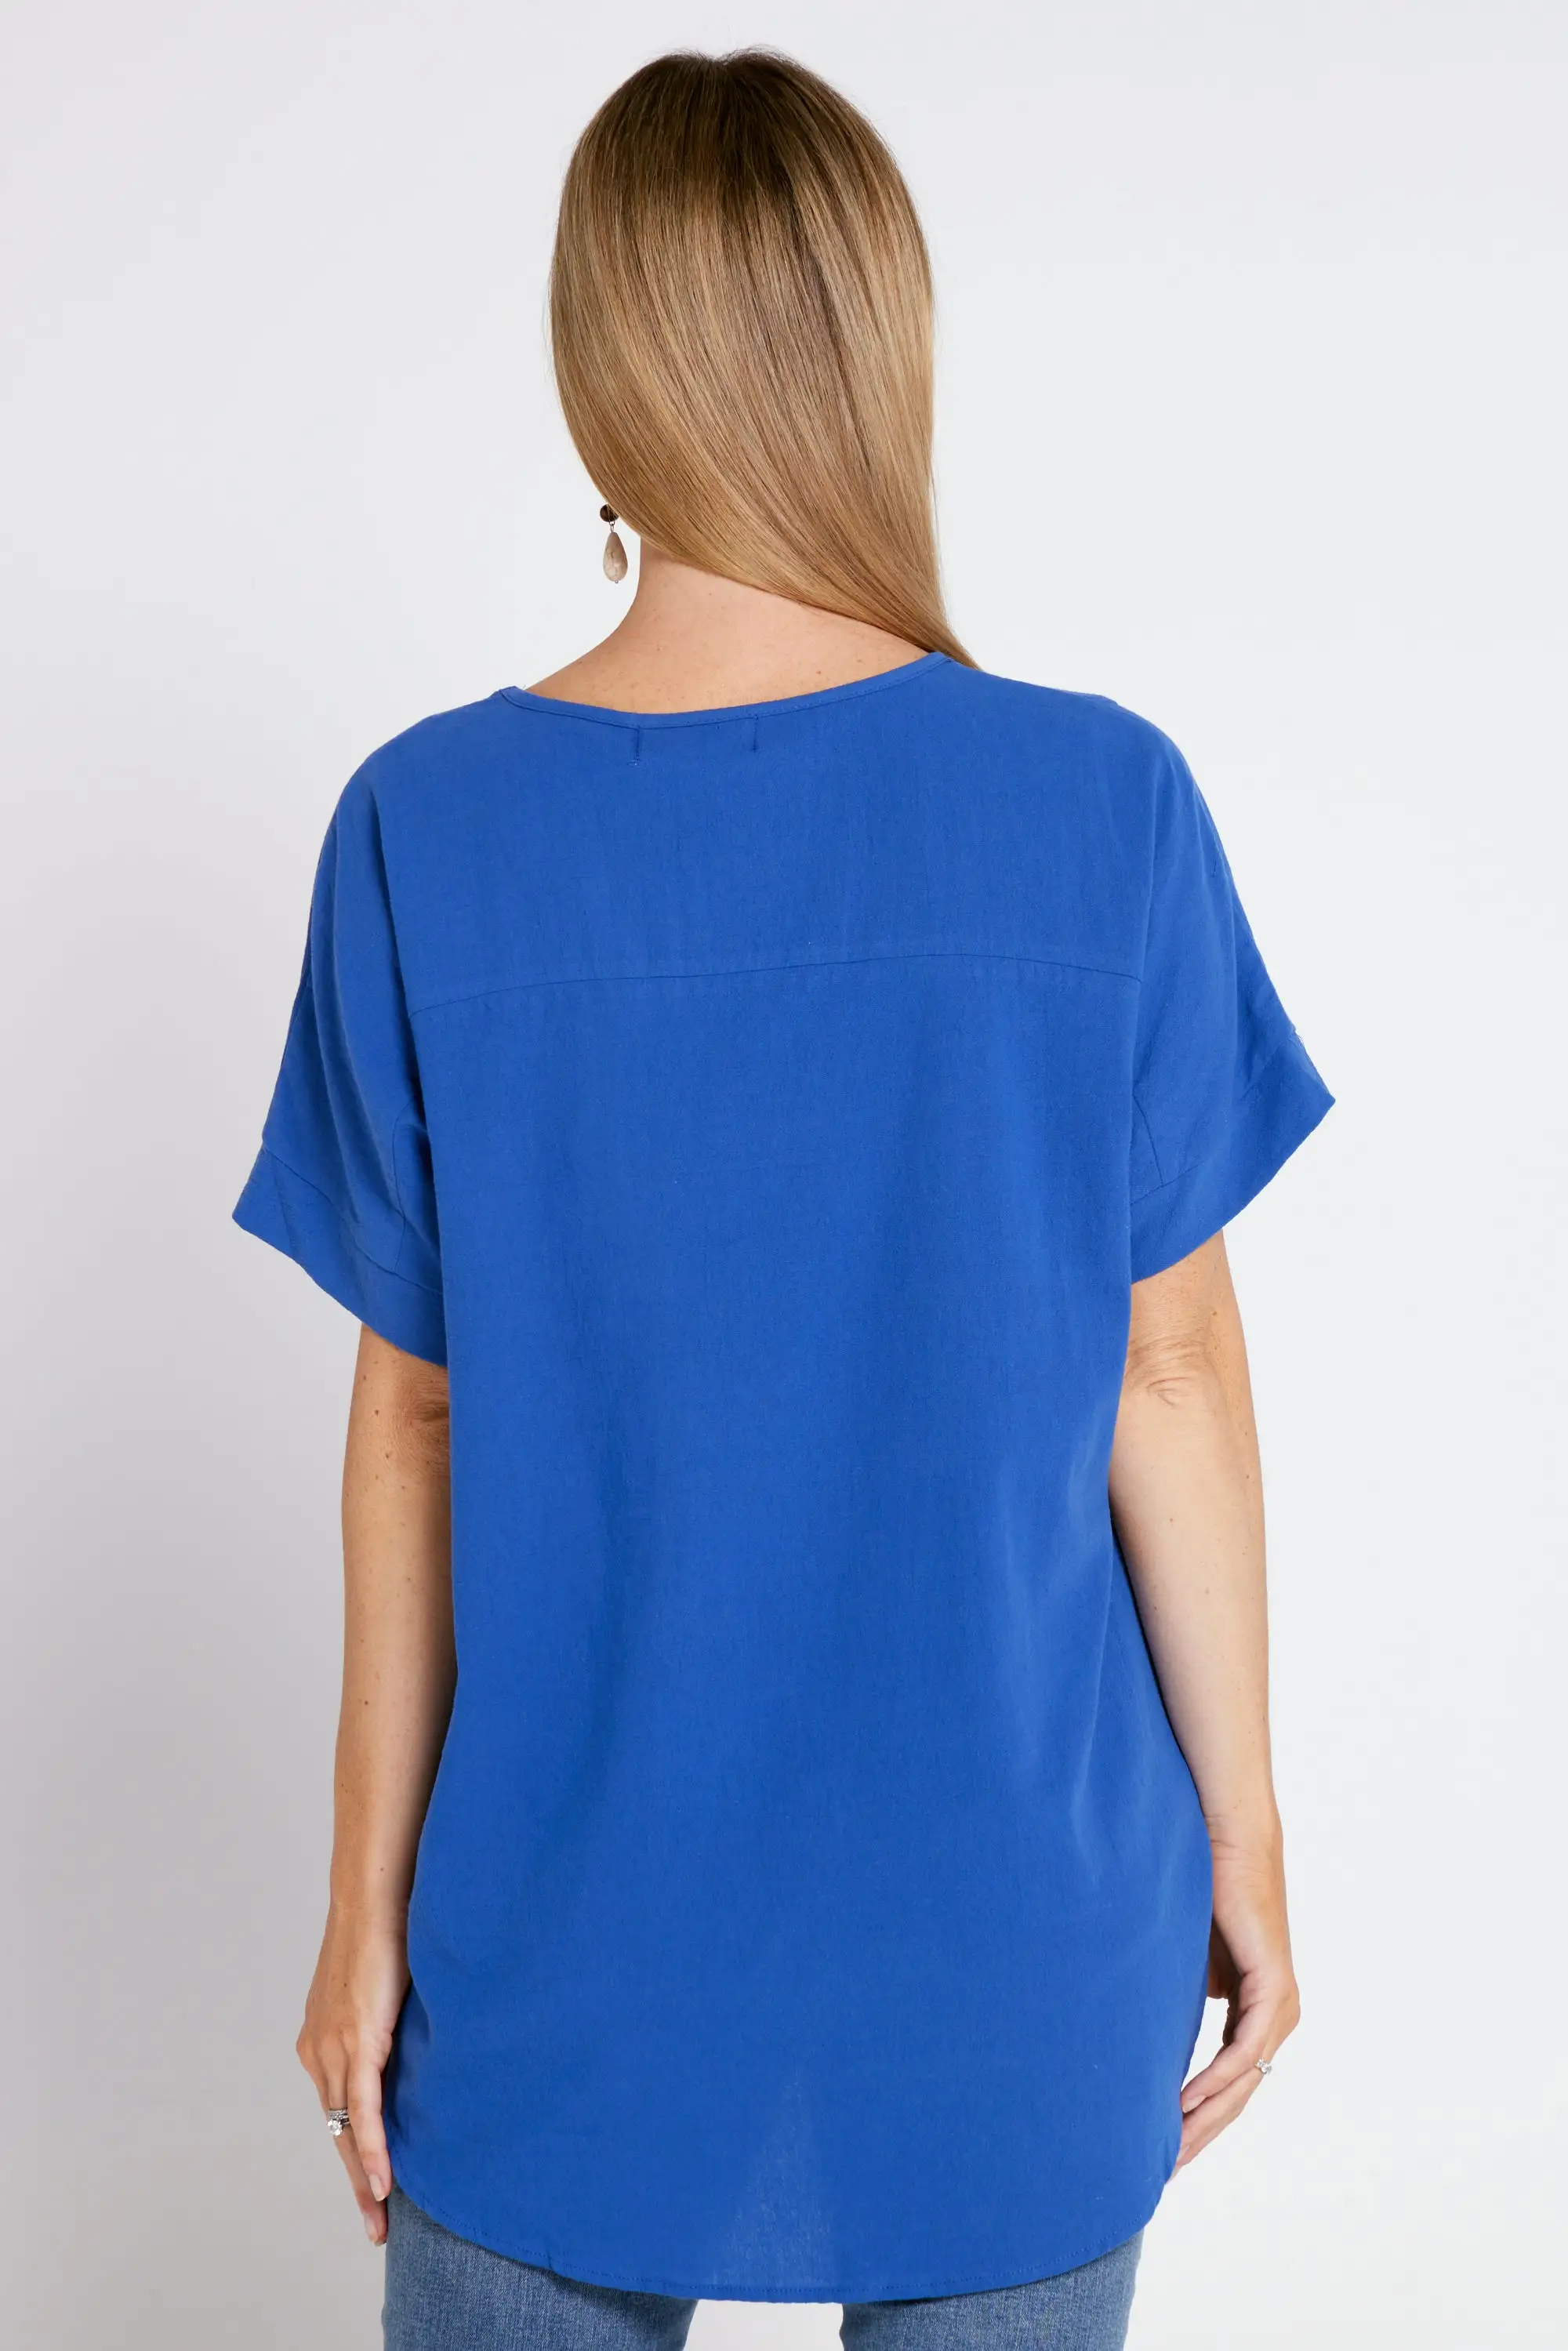 Amity Upcycled Cotton Top - Blue